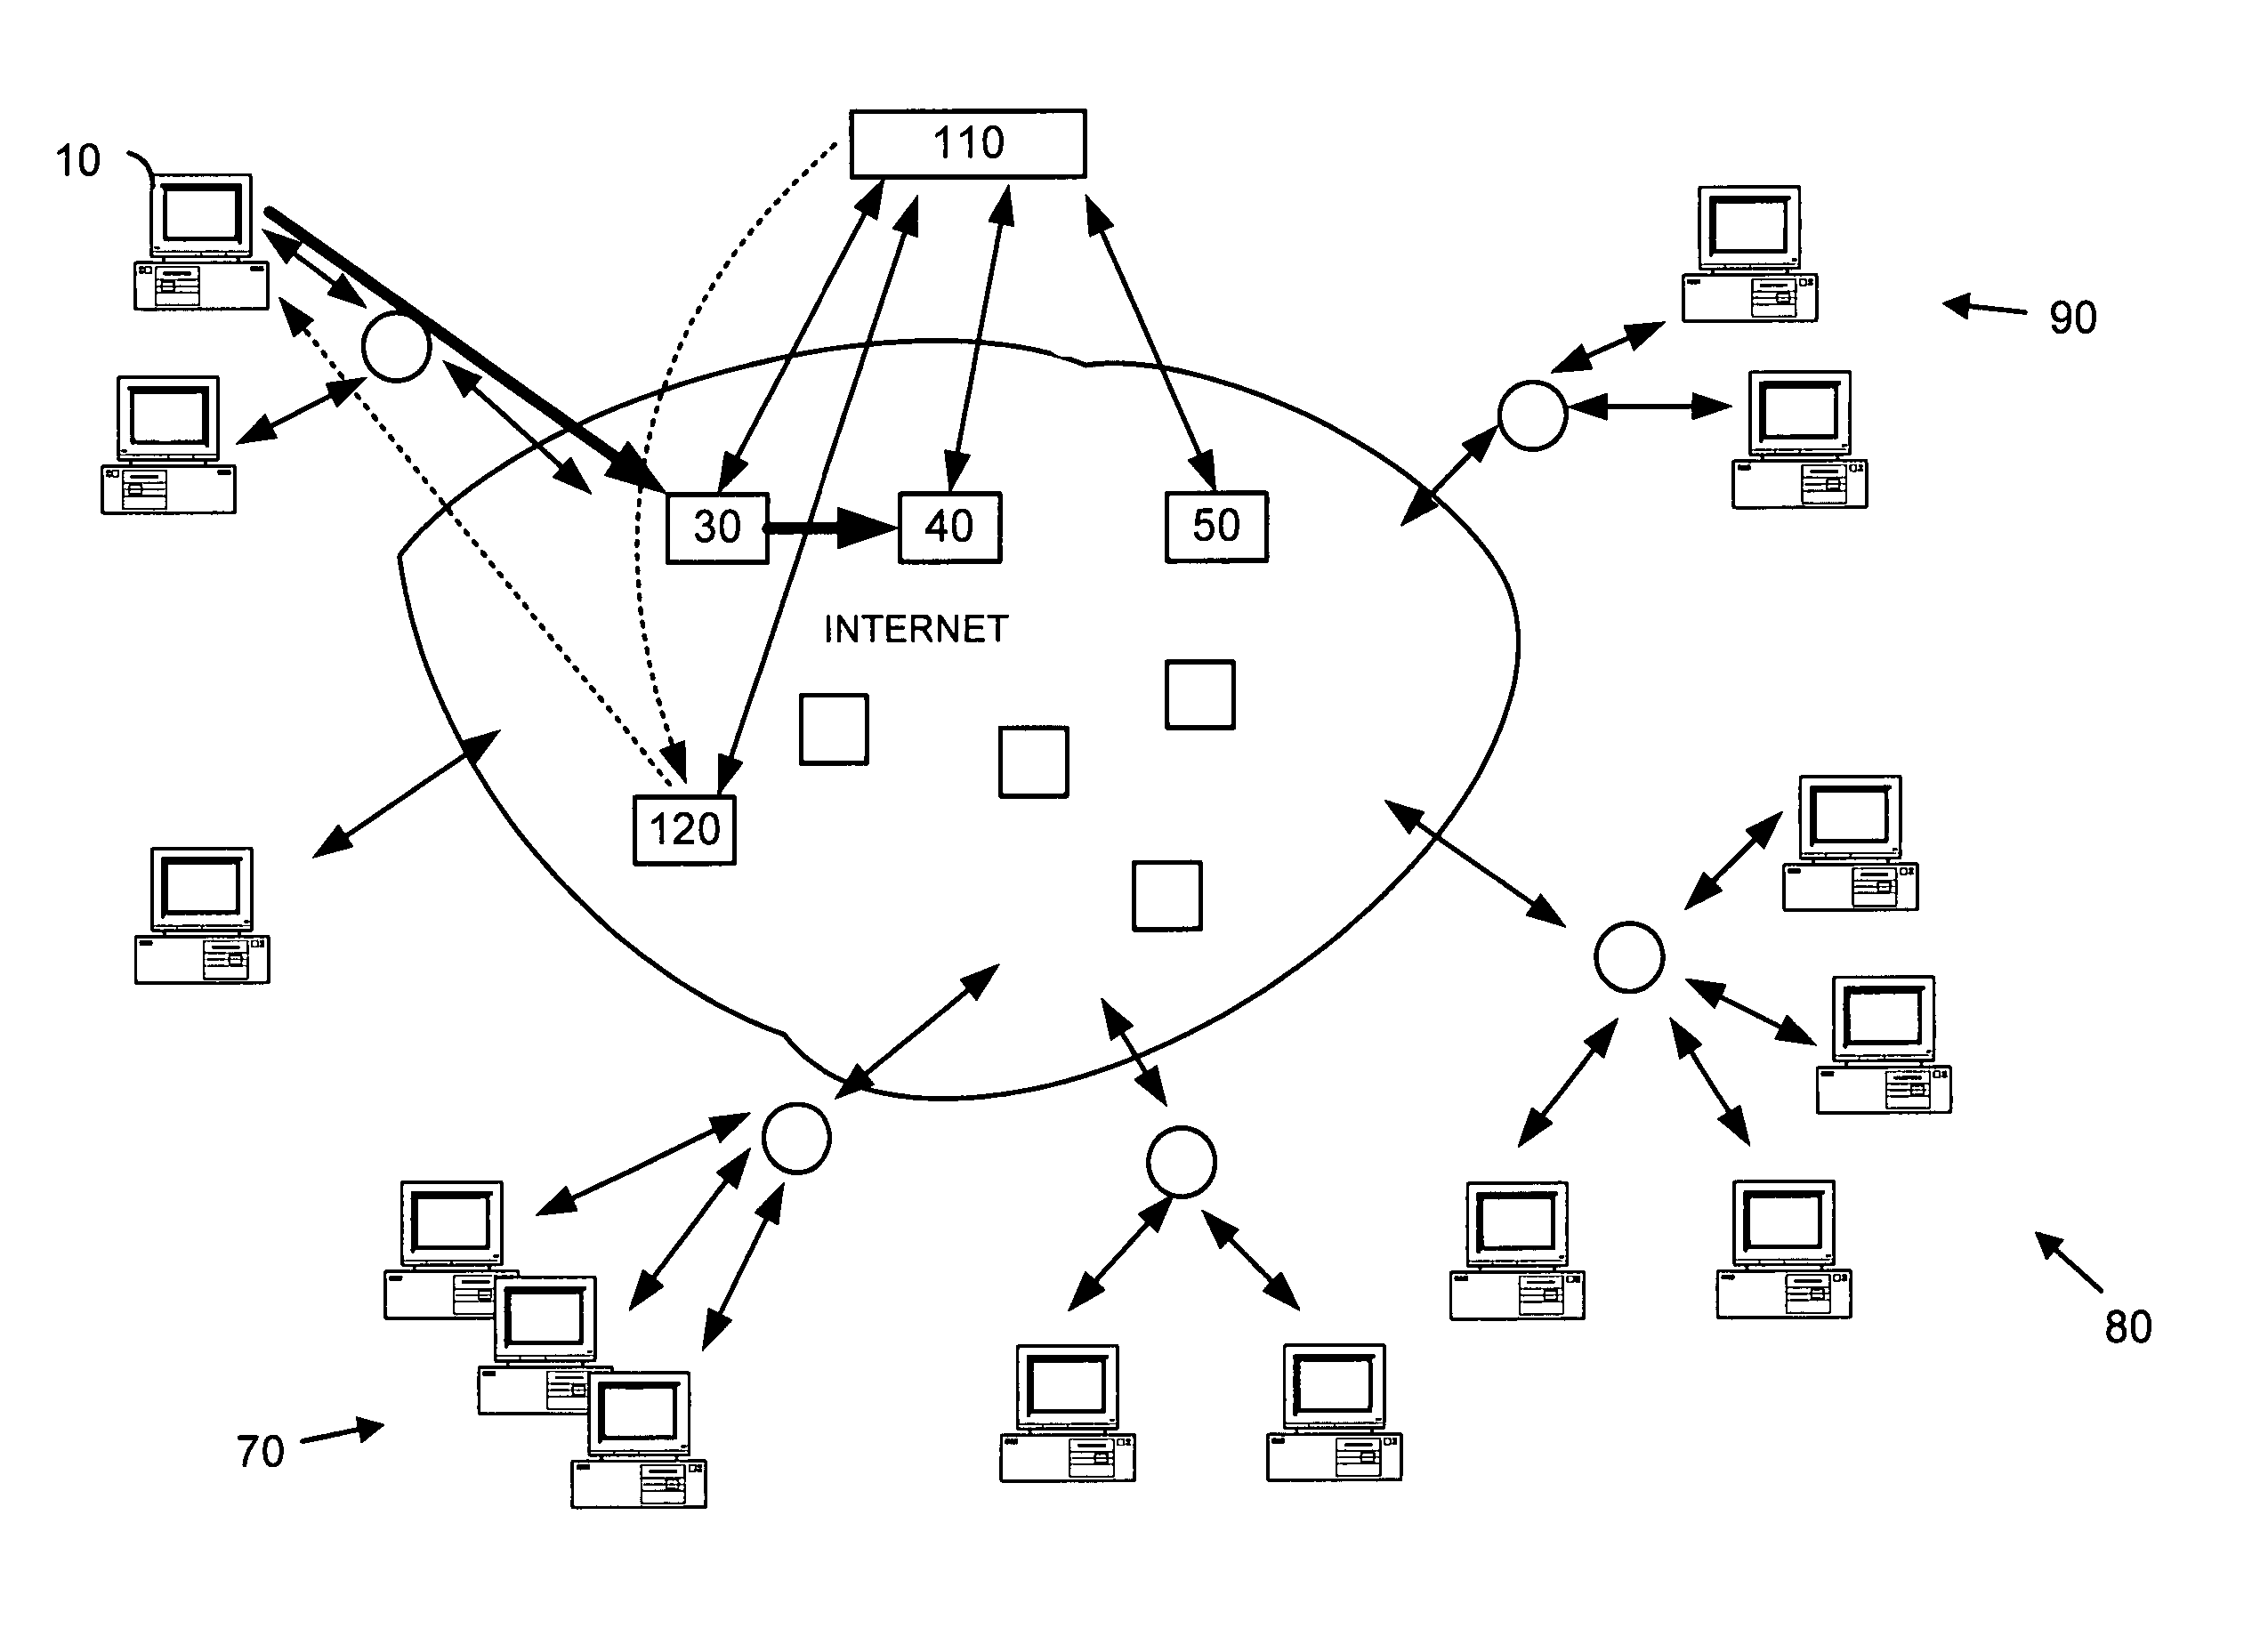 System for email processing and analysis